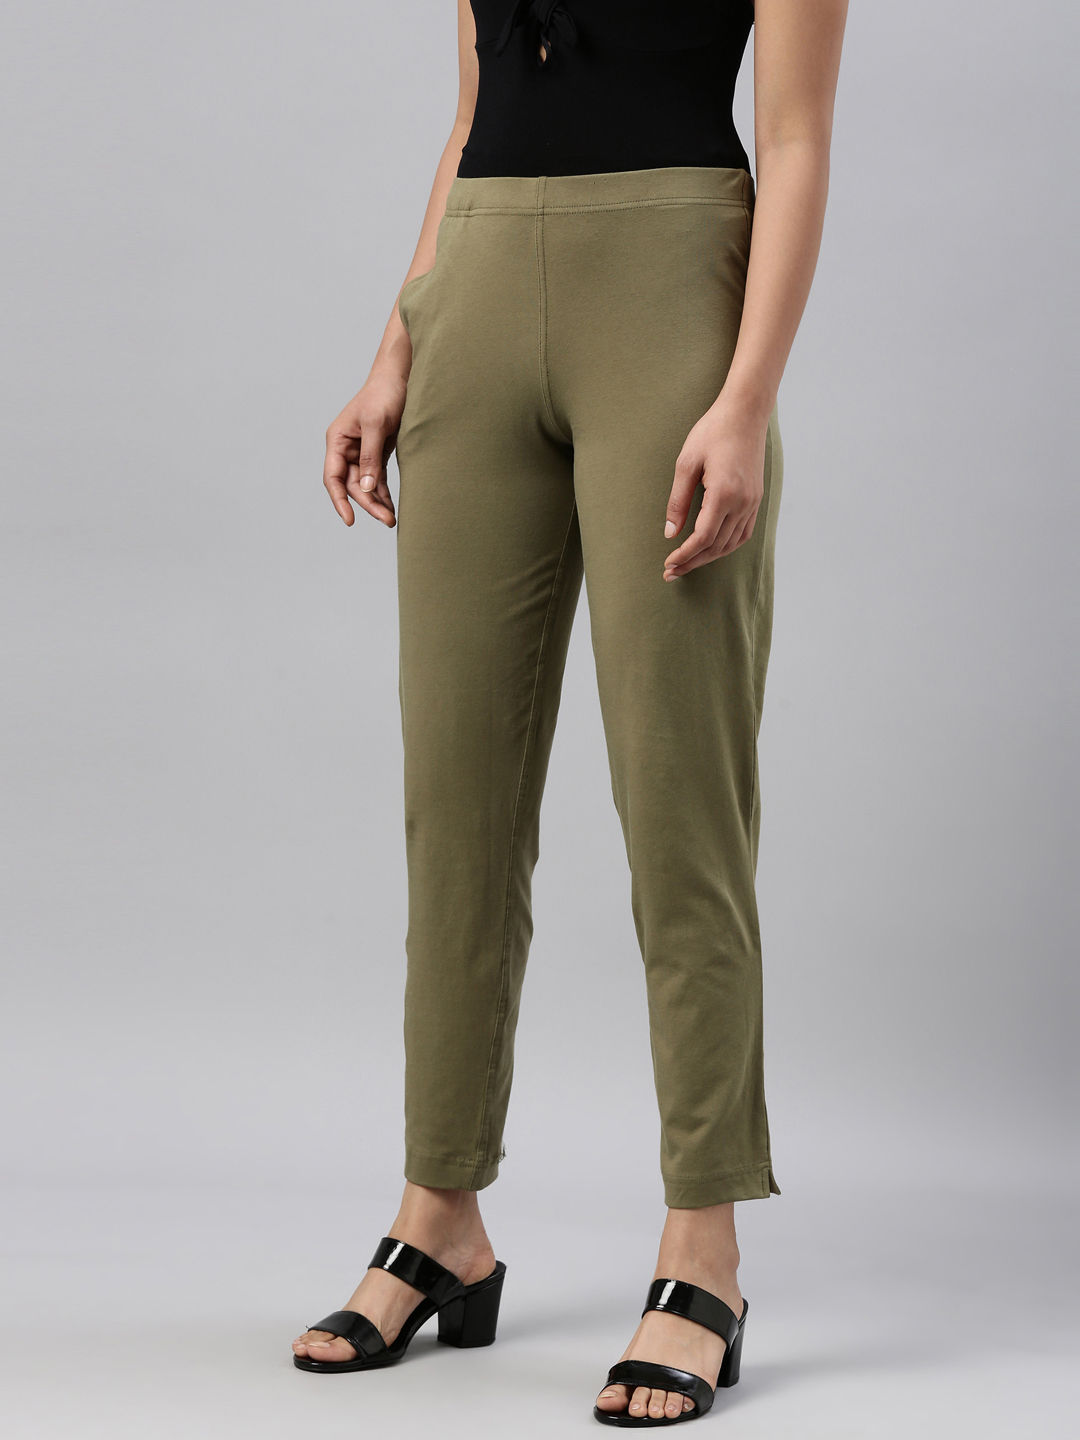 What to Wear with Olive Green Pants Complete Guide for Women